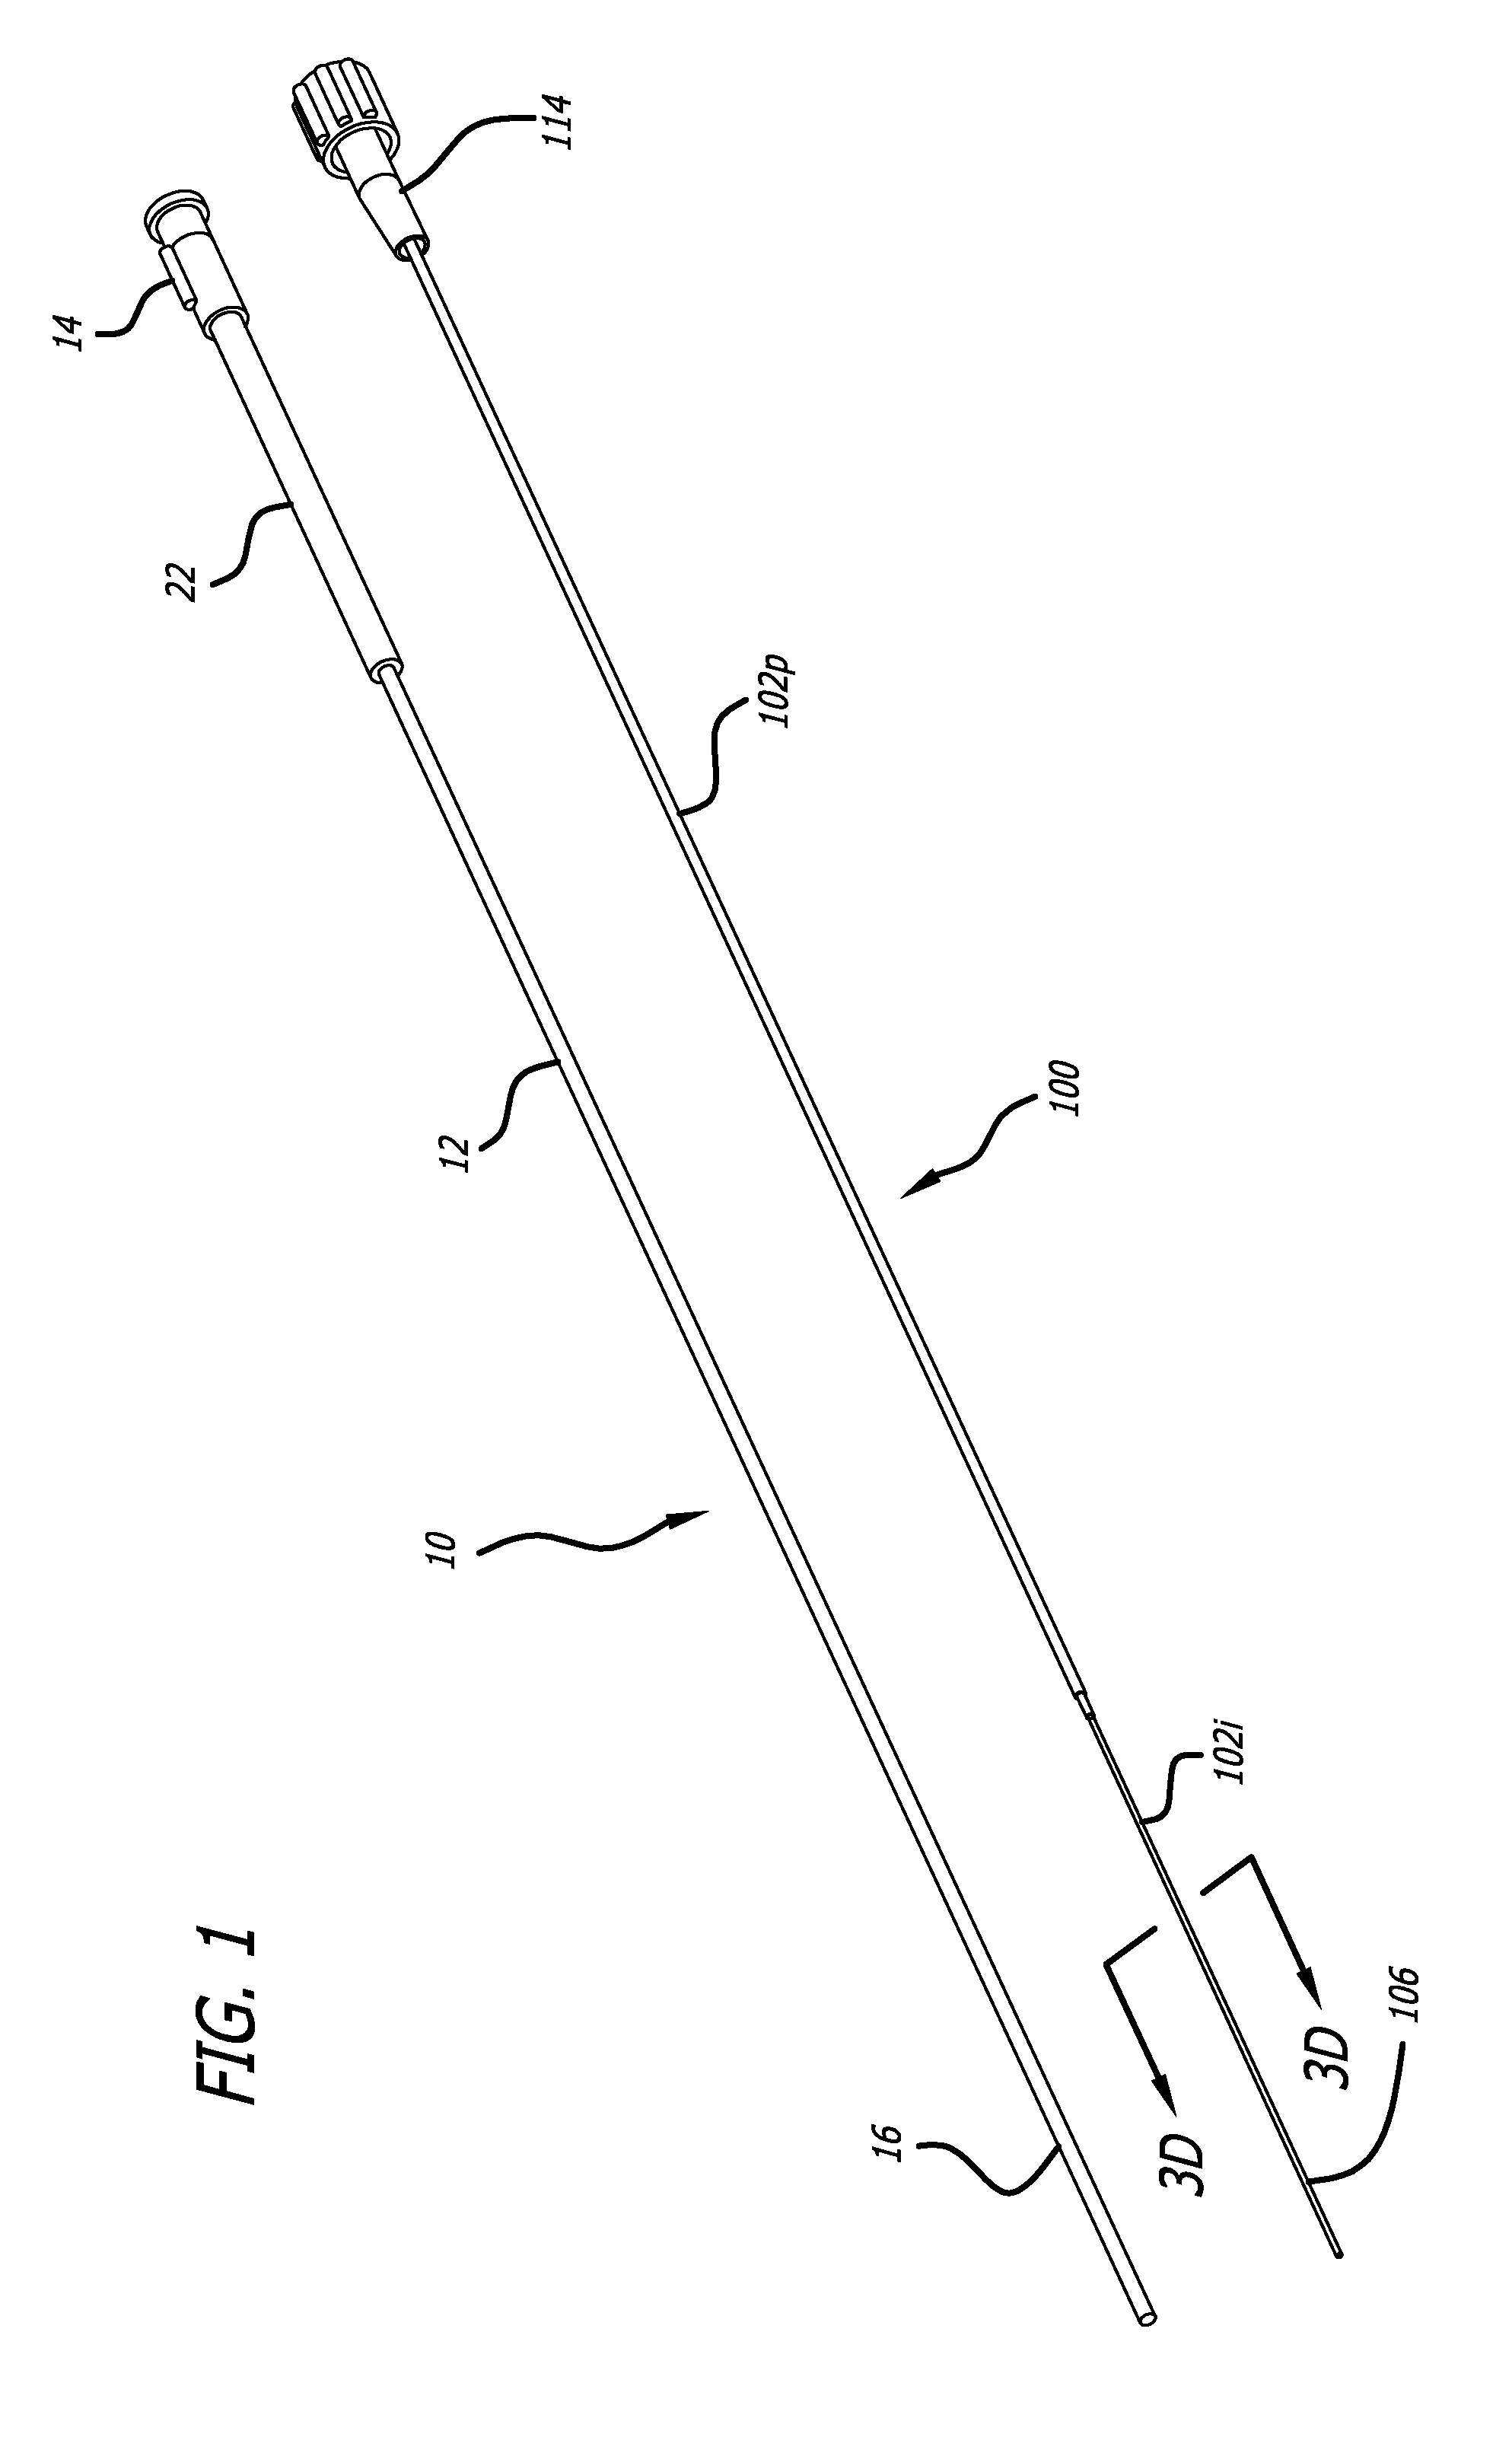 Methods, devices and systems for treating and/or diagnosis of disorders of the ear, nose and throat